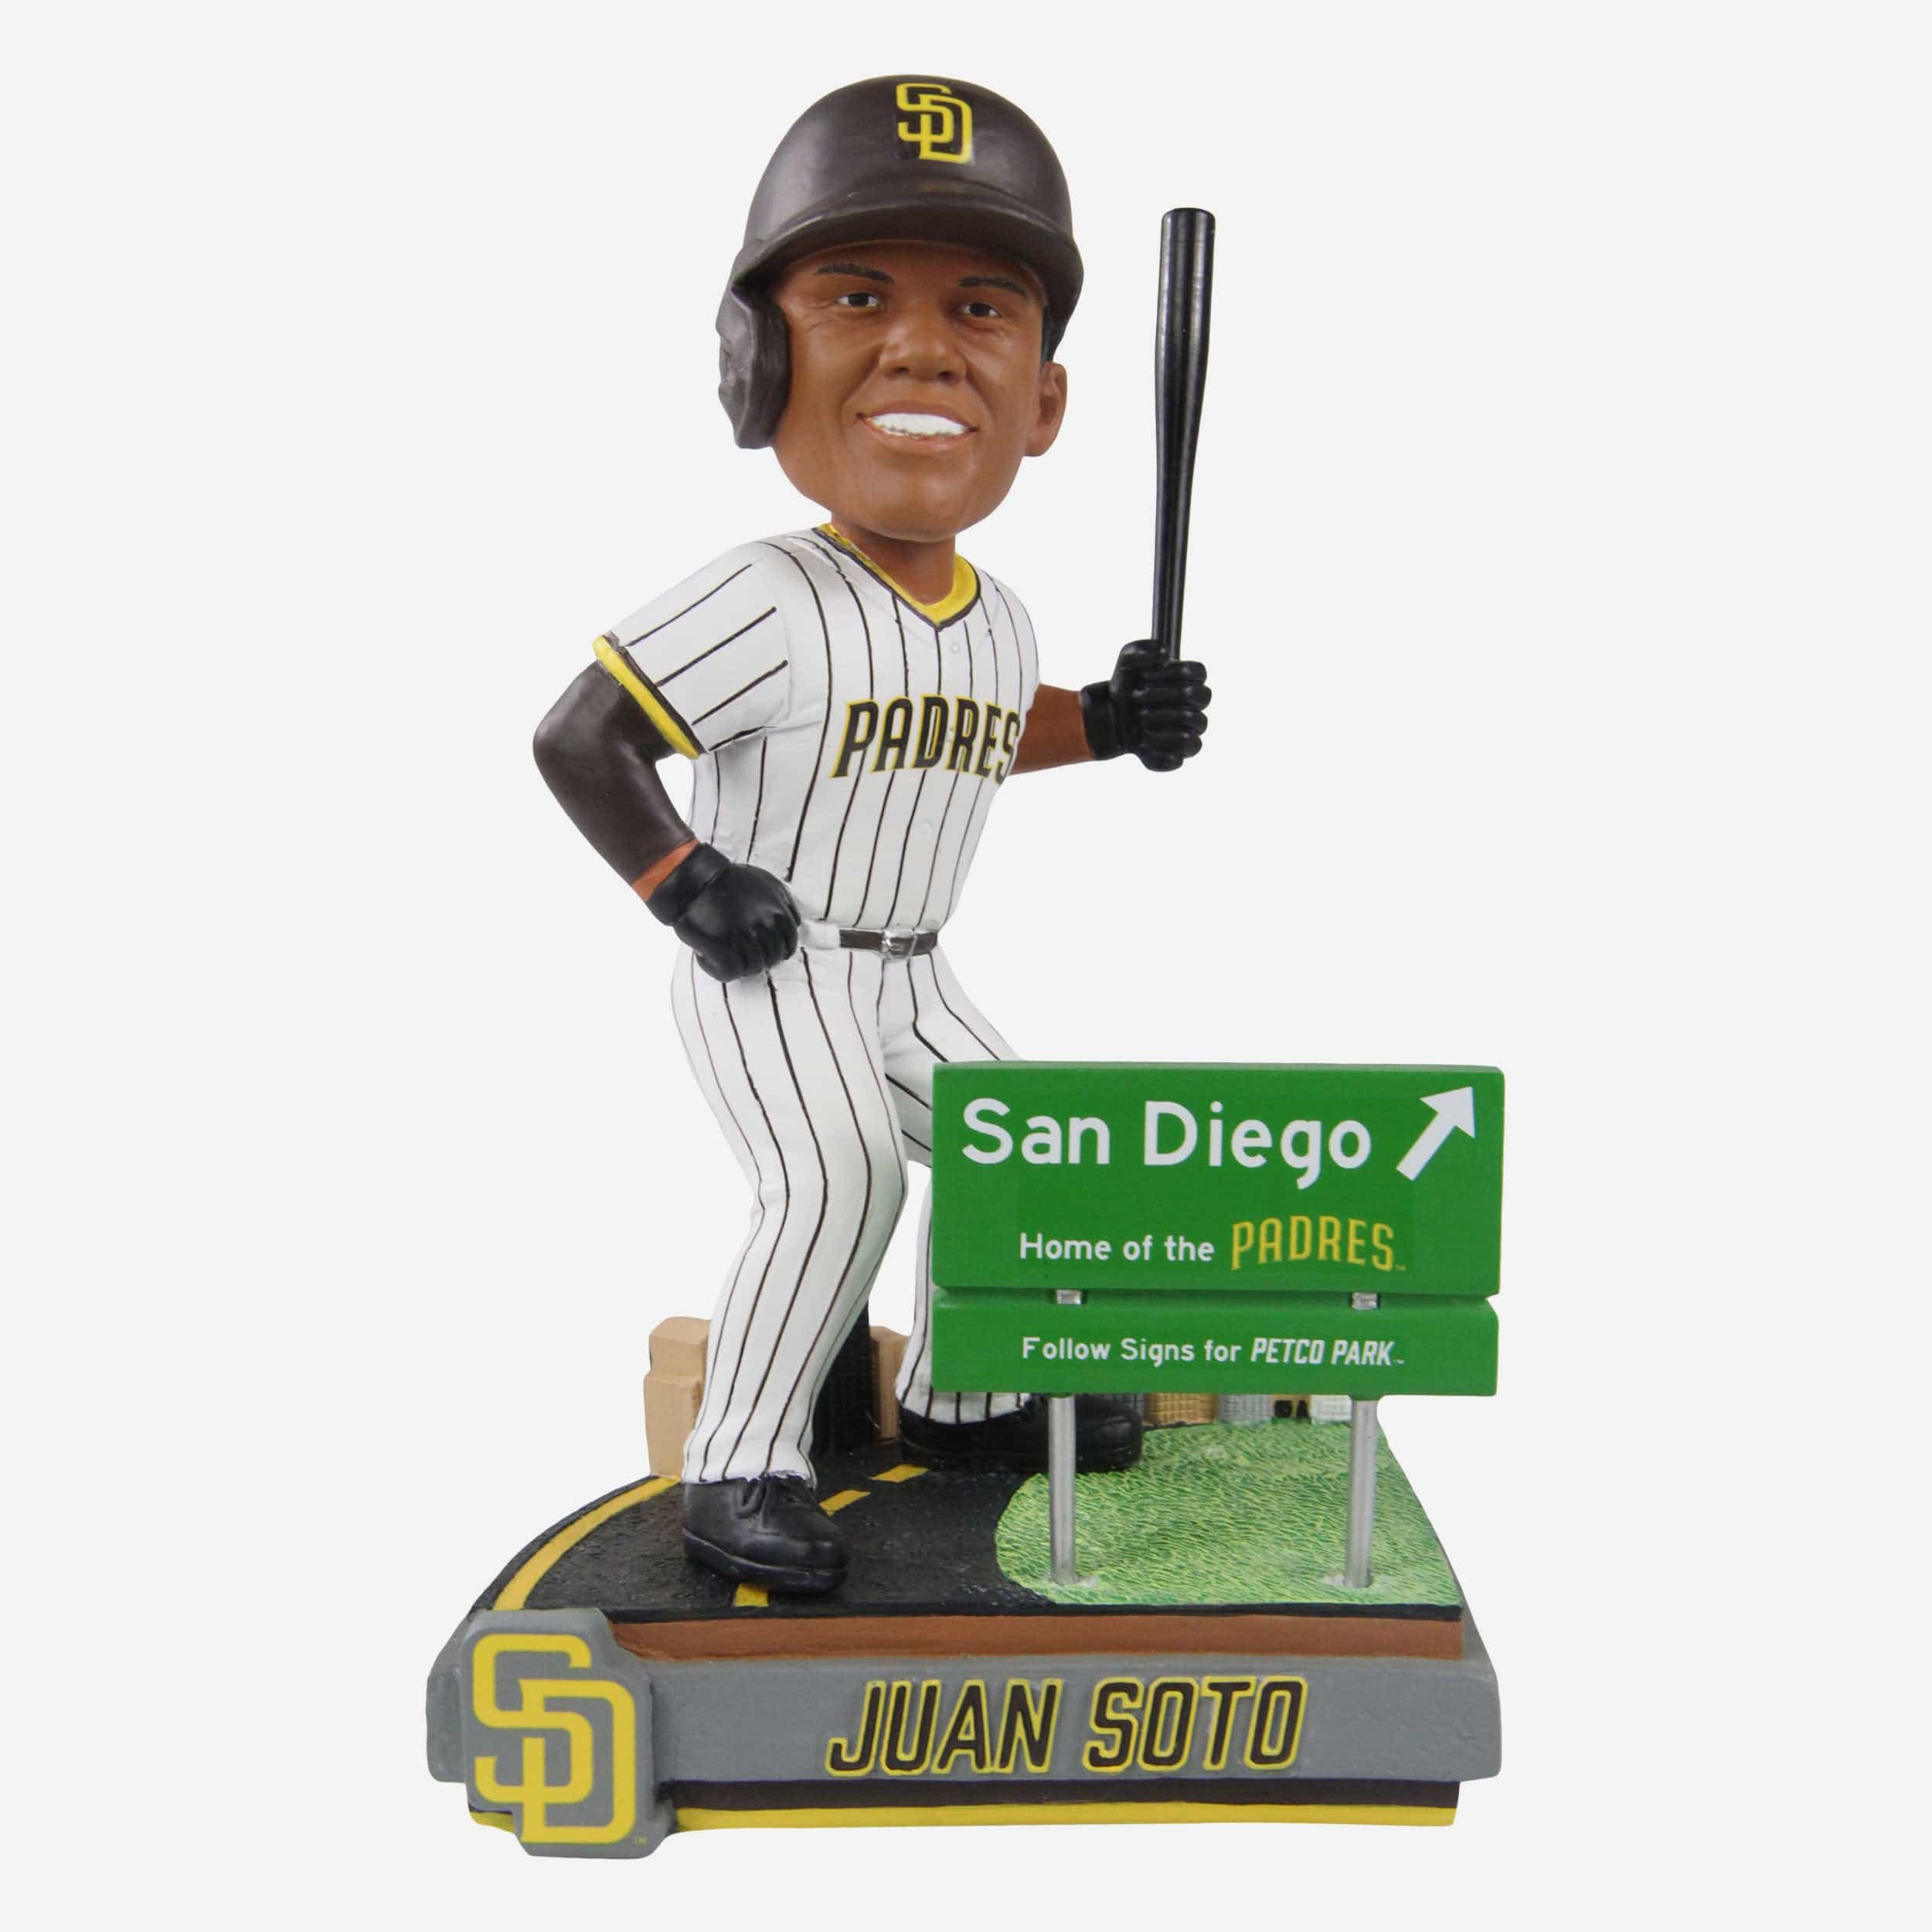 San Diego Padres former player bobbleheads litter local street - Sports  Illustrated